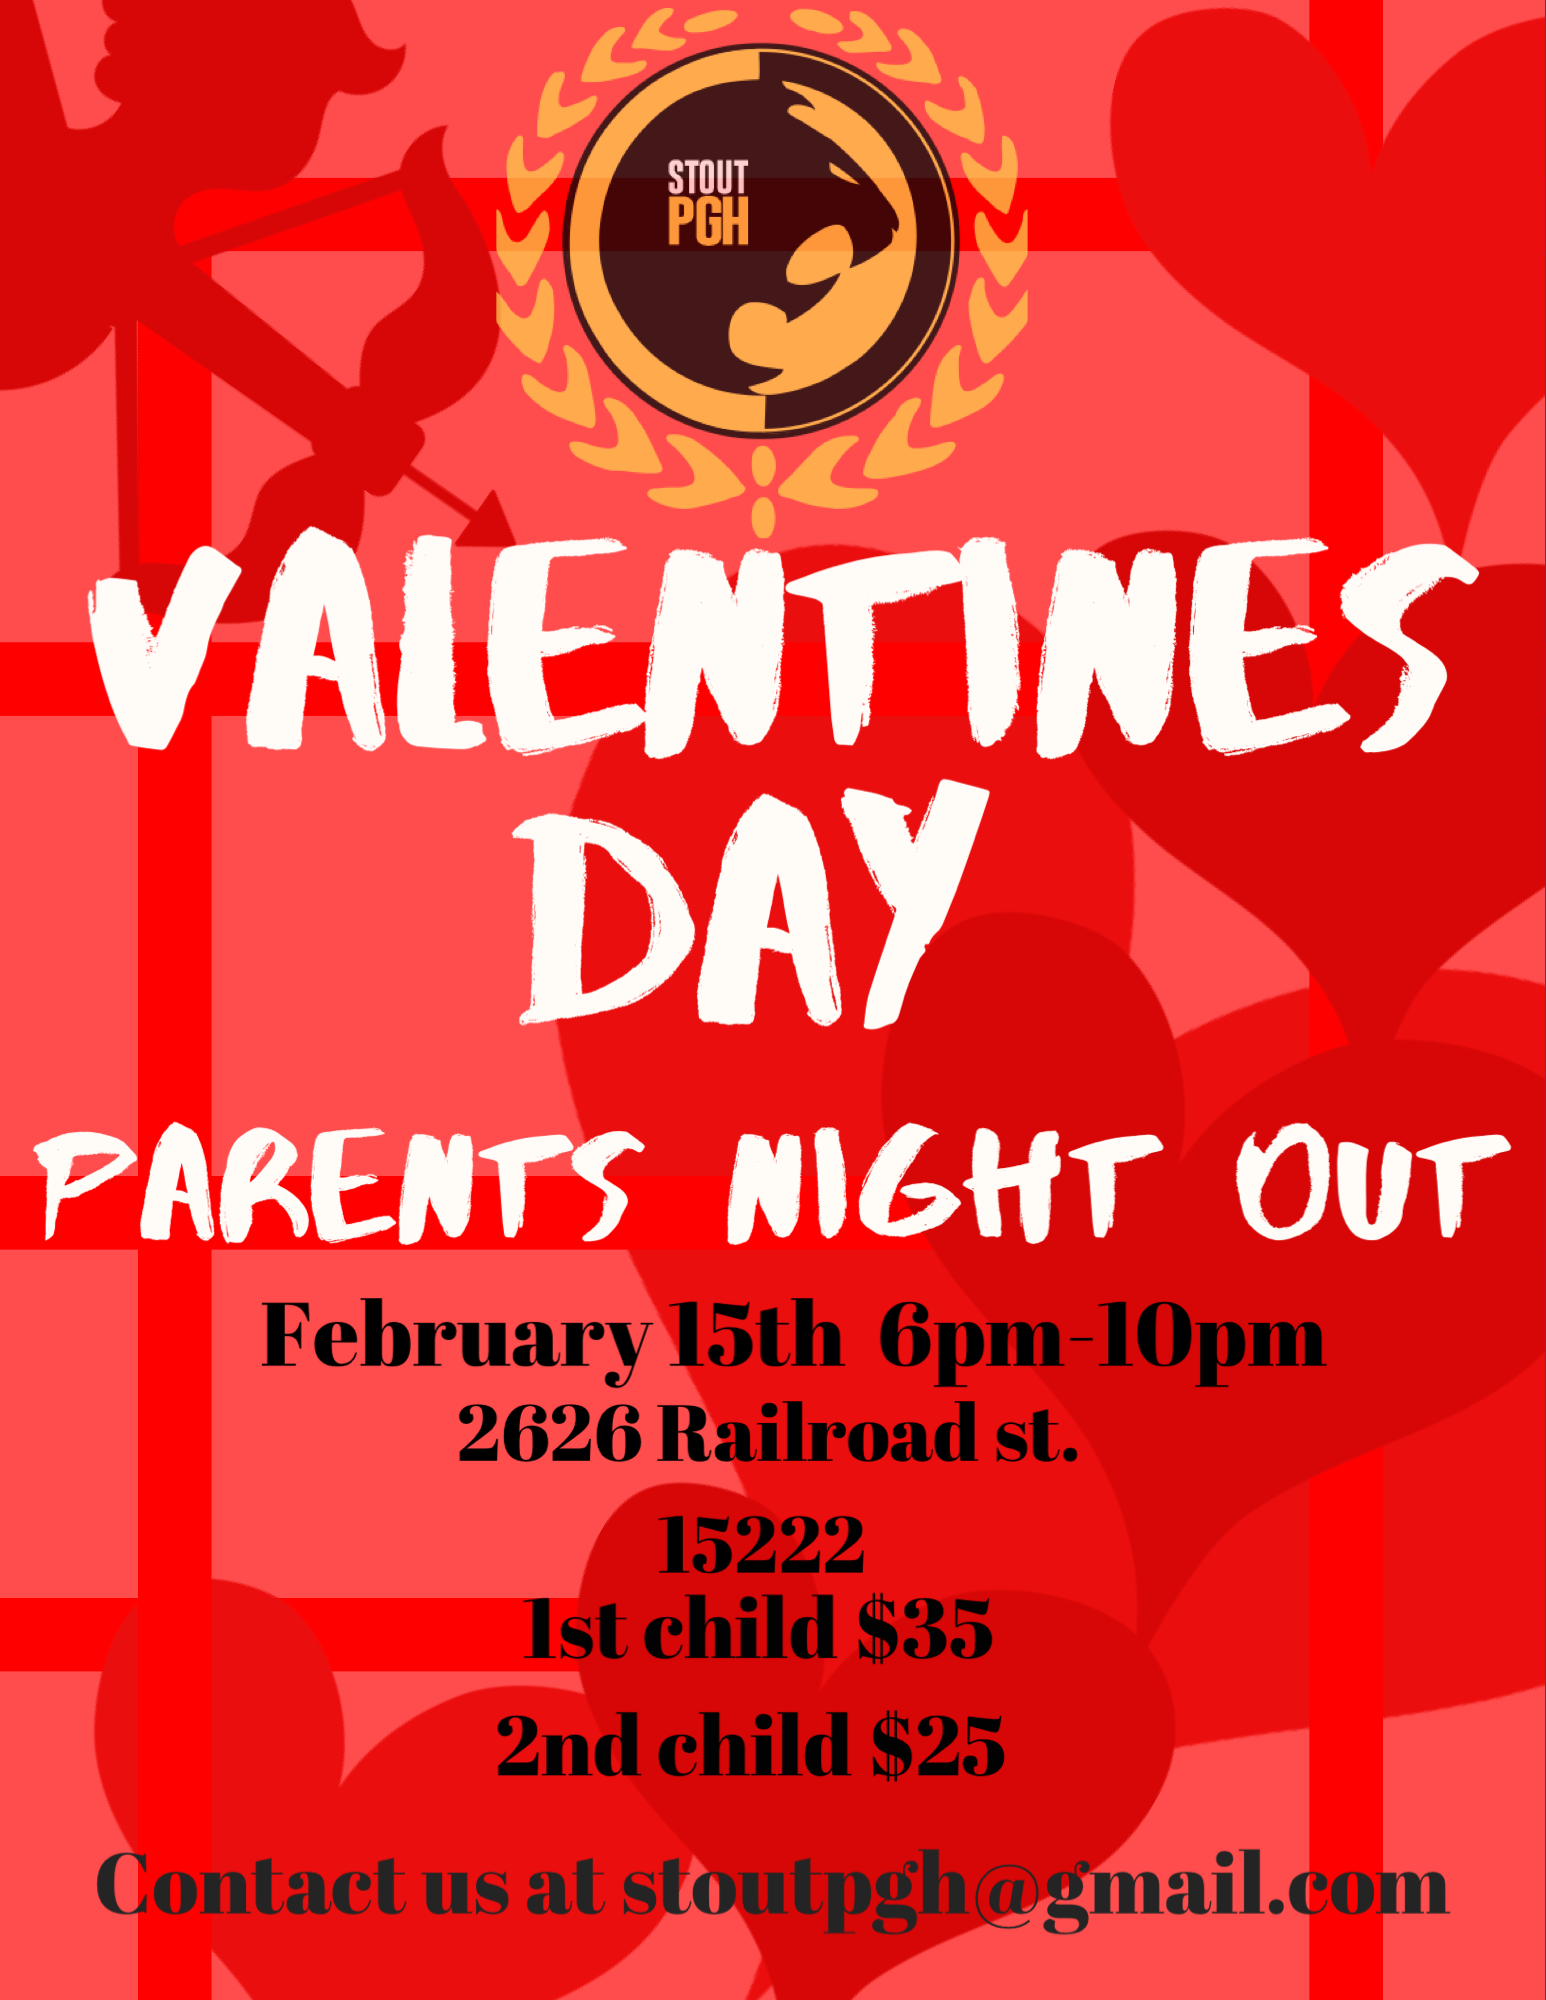 Valentines’ Day Parents Night Out